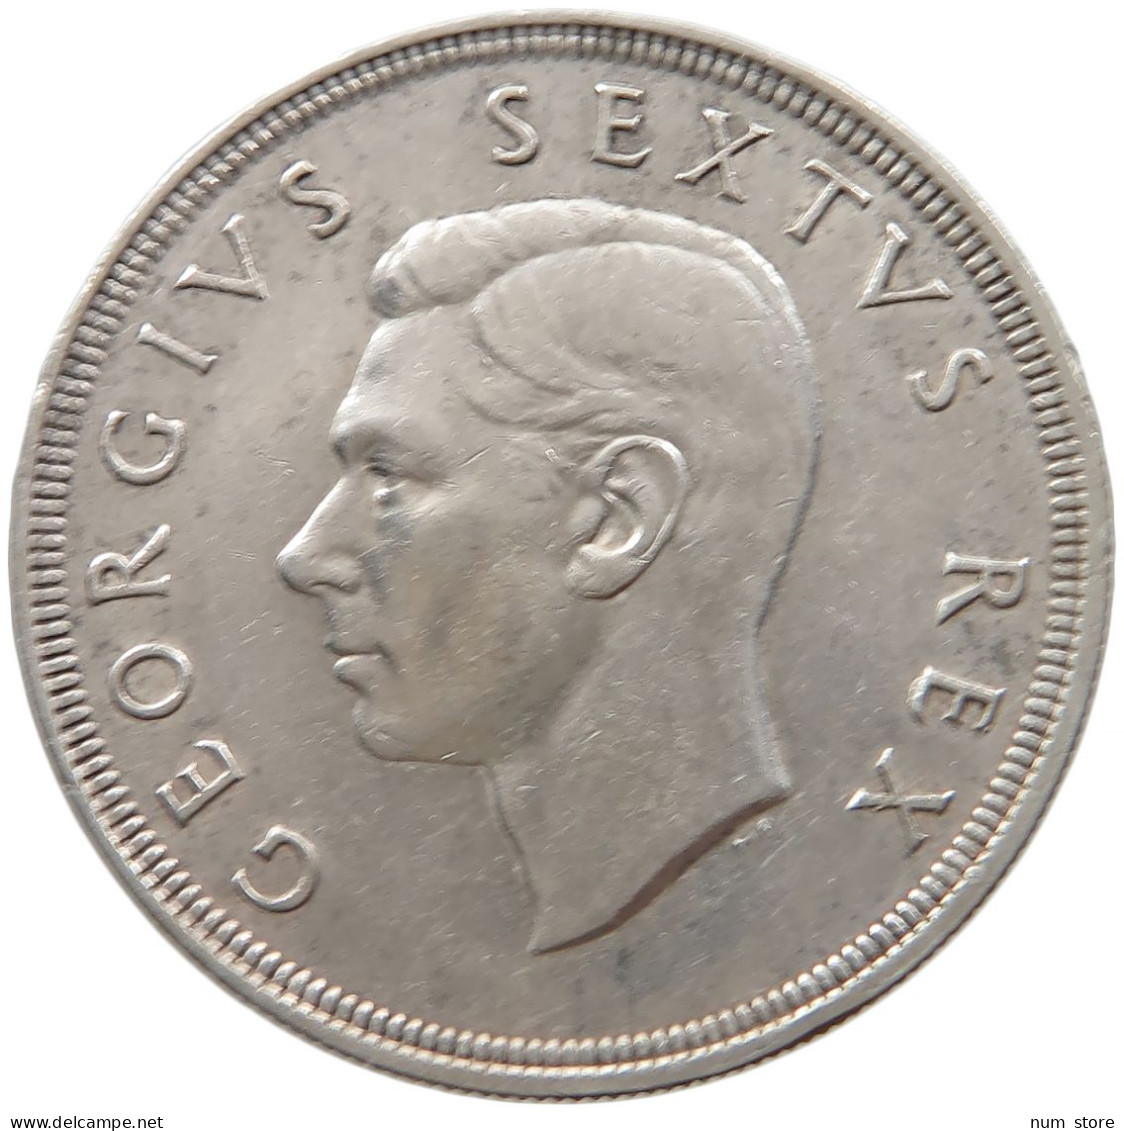 SOUTH AFRICA 5 SHILLINGS 1951 George VI. (1936-1952) #t025 0029 - South Africa